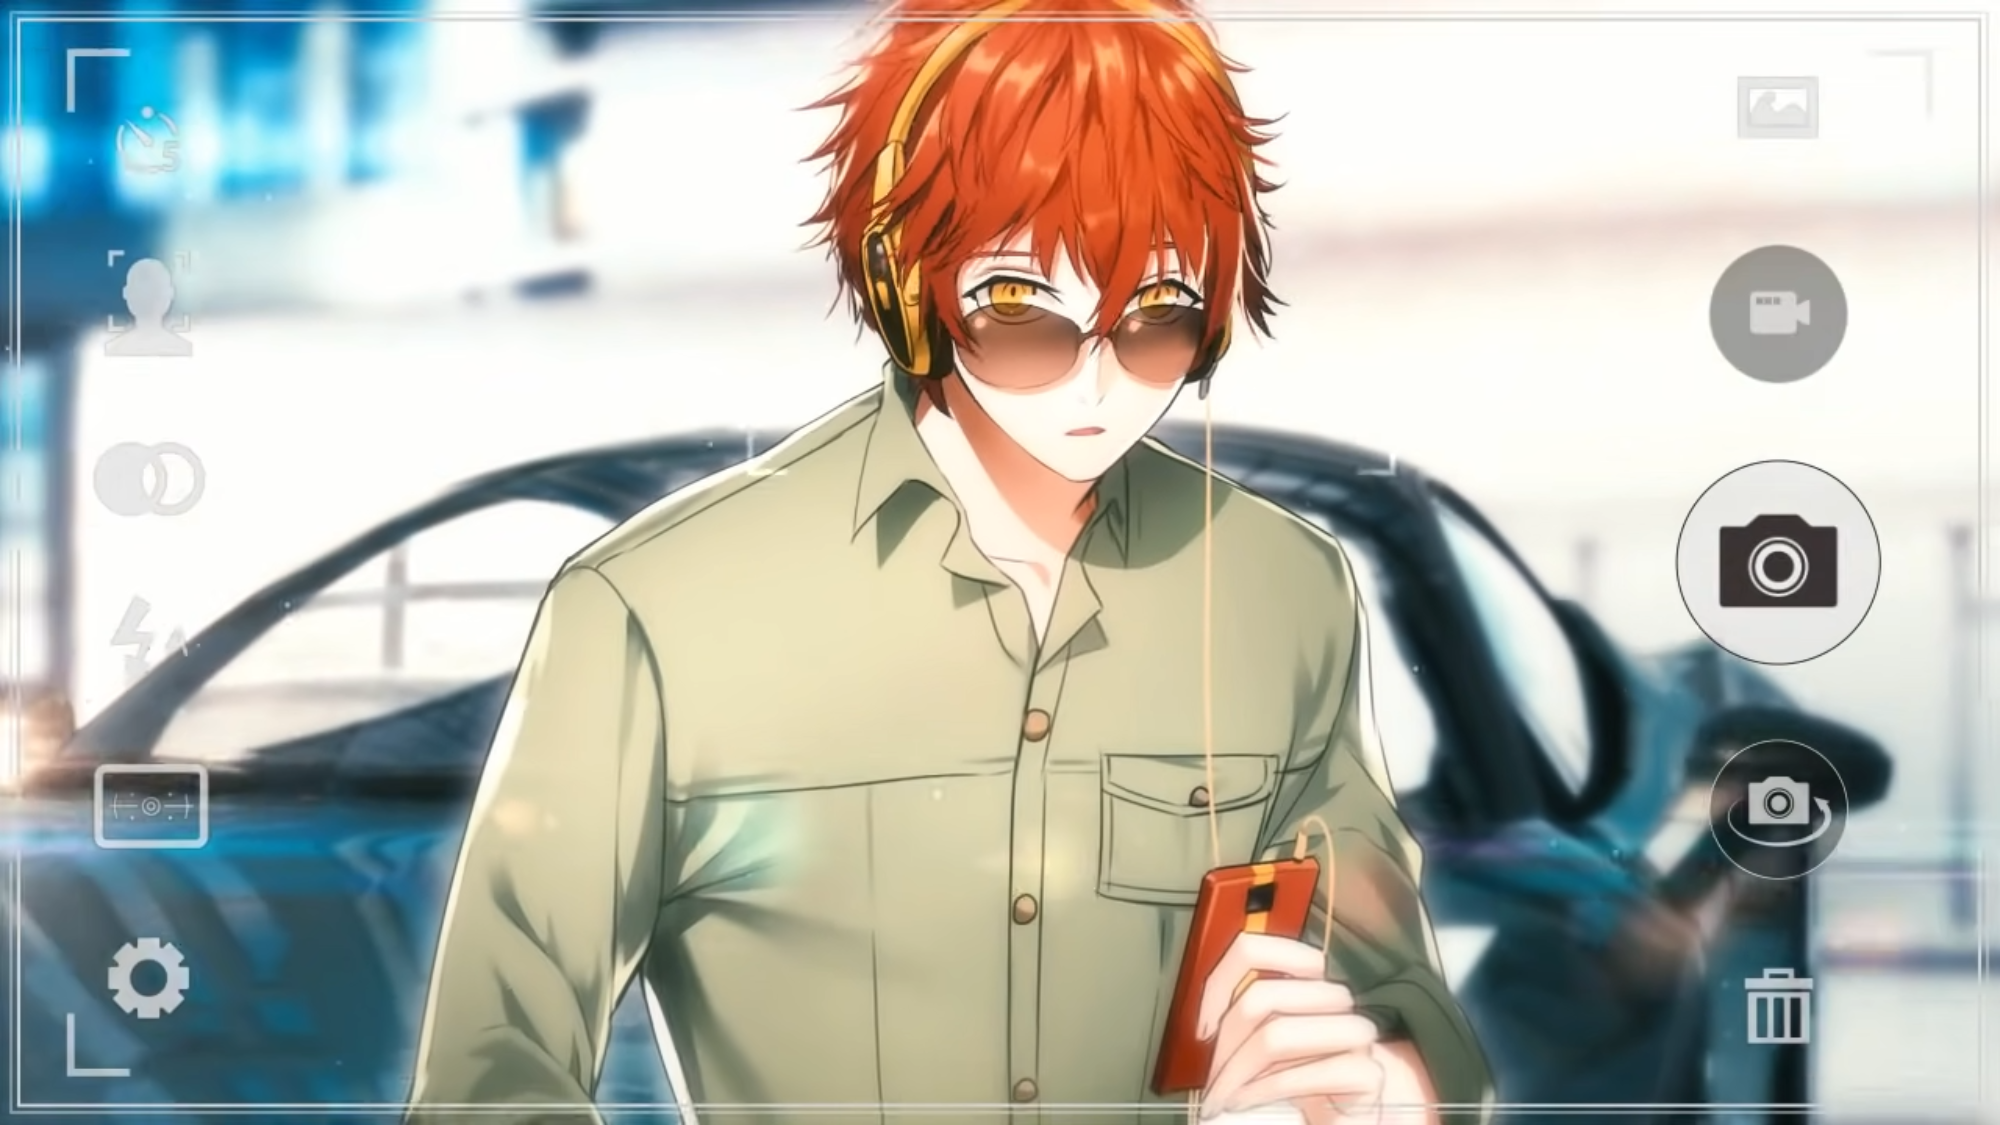 Mystic Messenger: how to get on 707 s route walkthrough Prologue. 